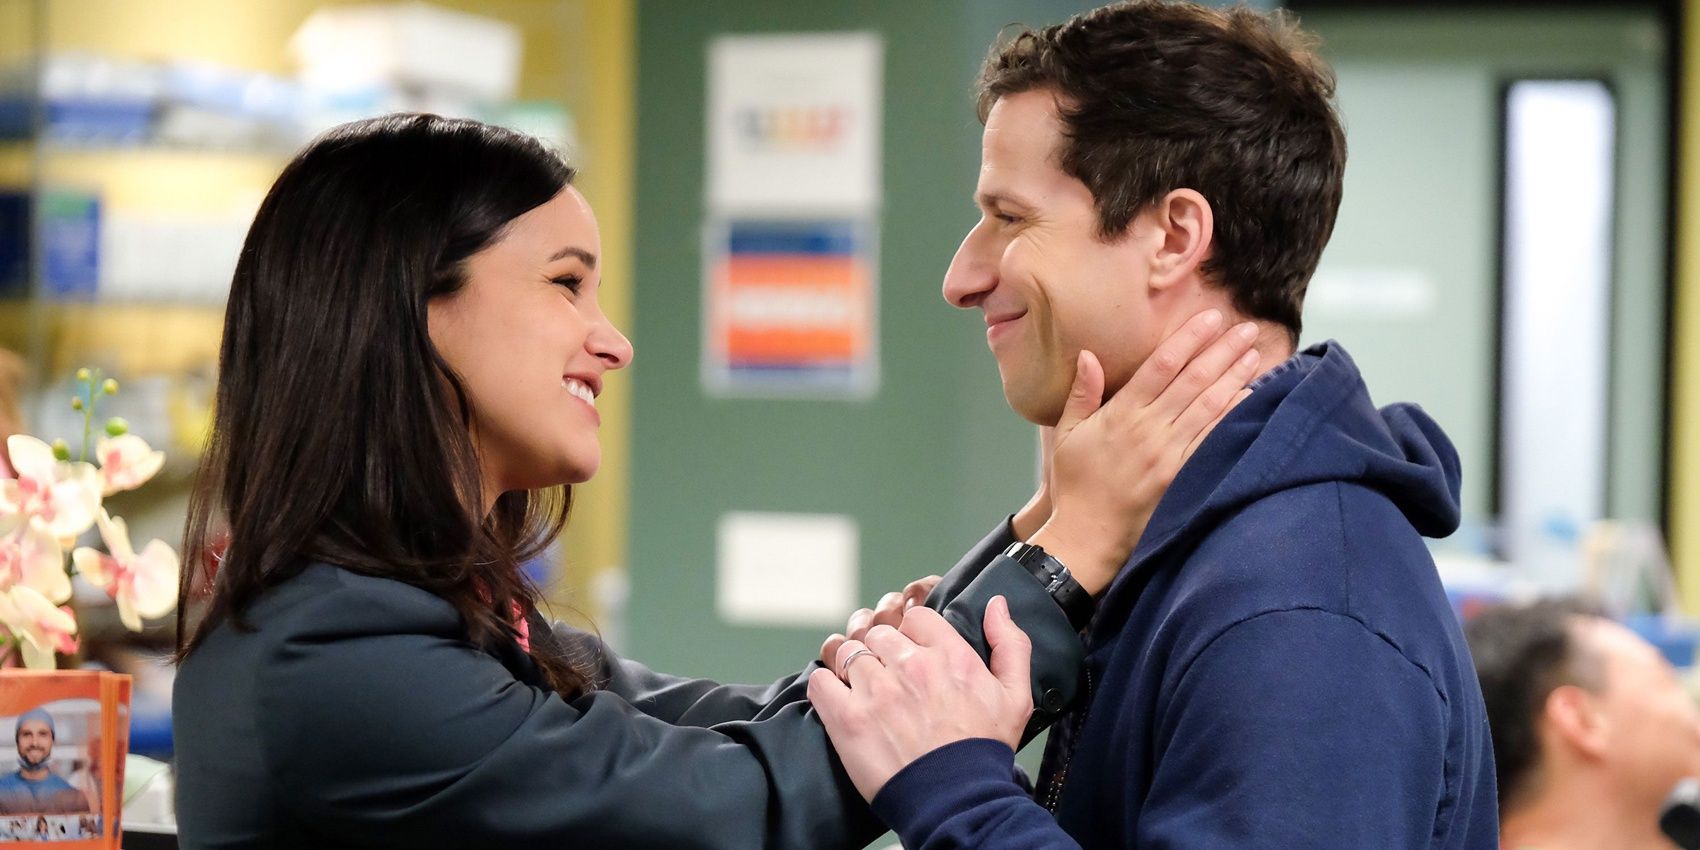 Brooklyn Nine-Nine: 10 Funniest Quotes About Love